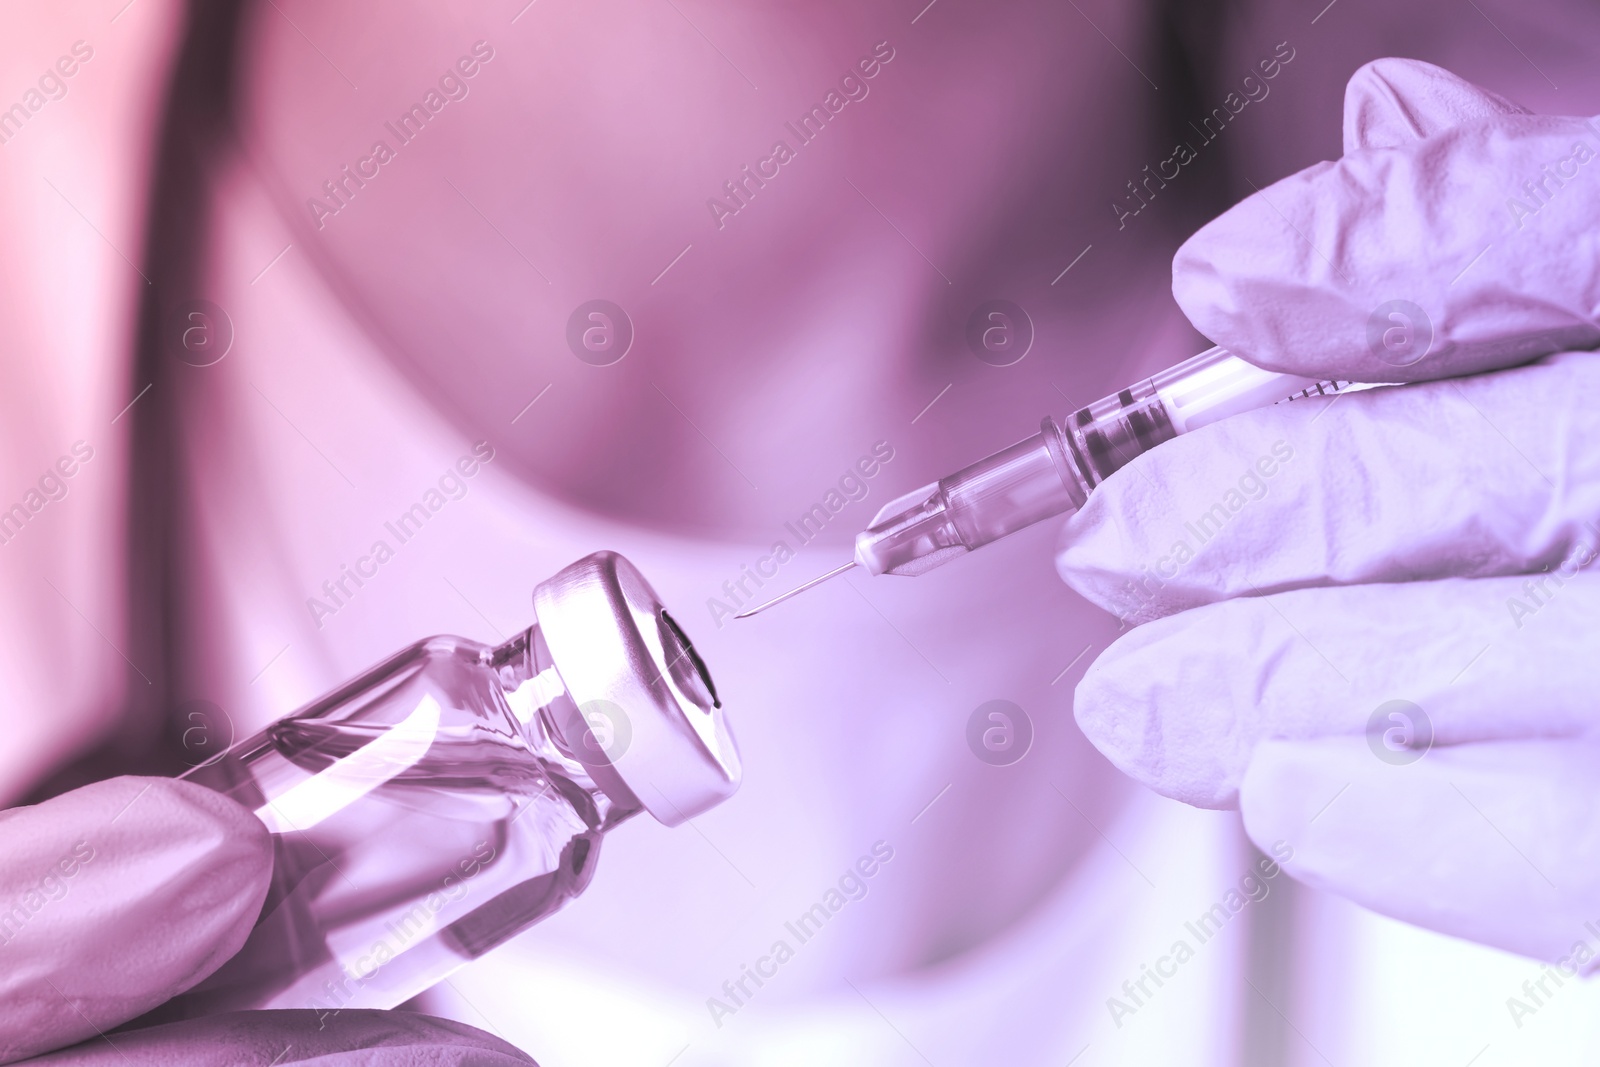 Image of Doctor filling syringe with medication from vial, toned in pink